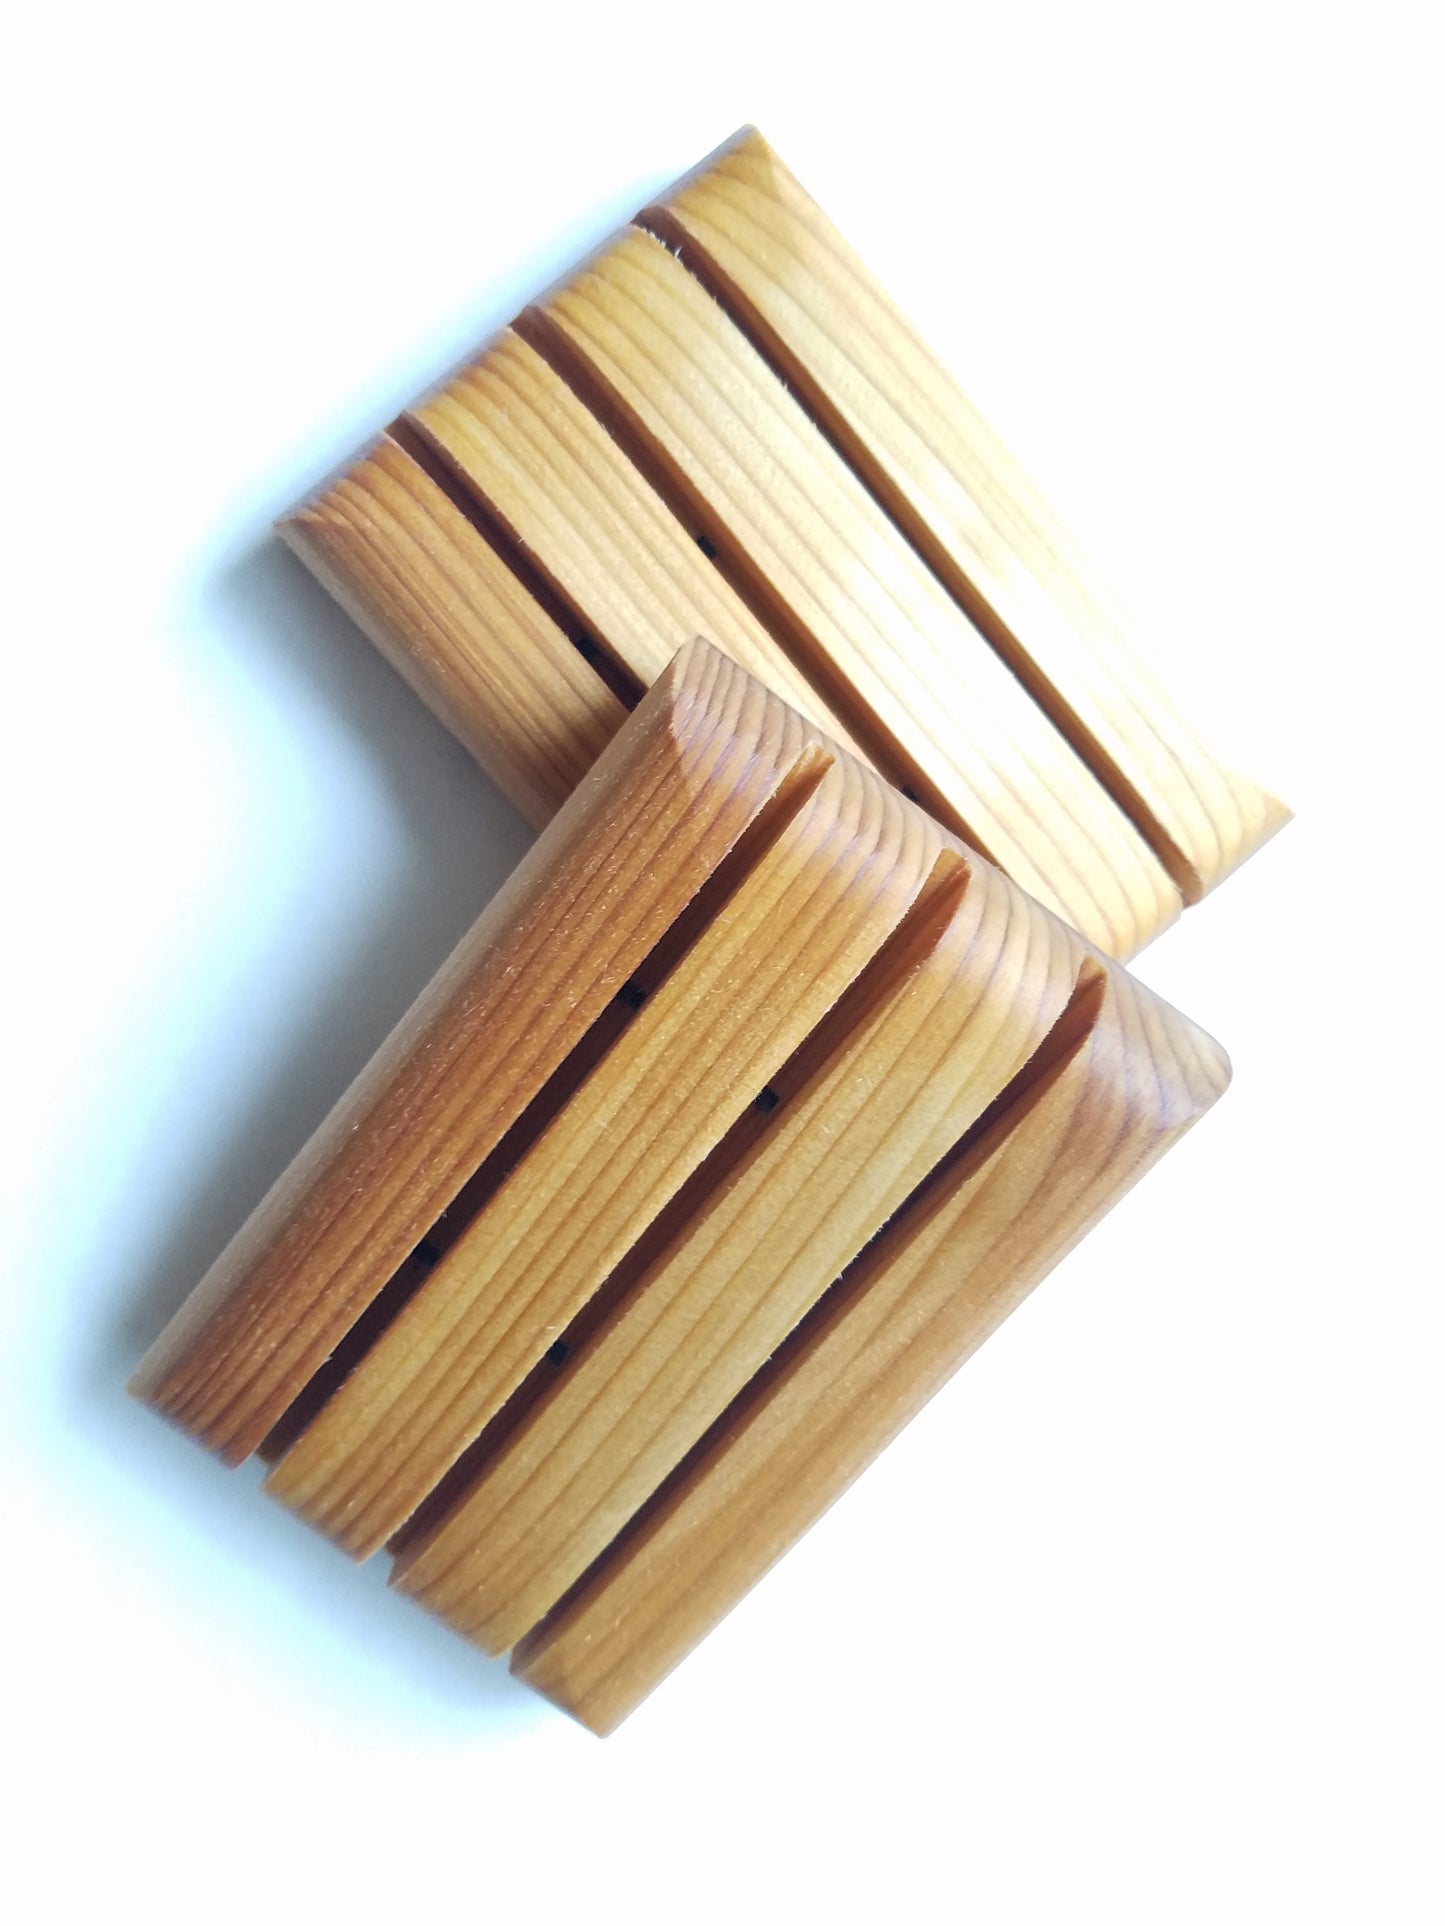 WOODEN SOAP DISHES